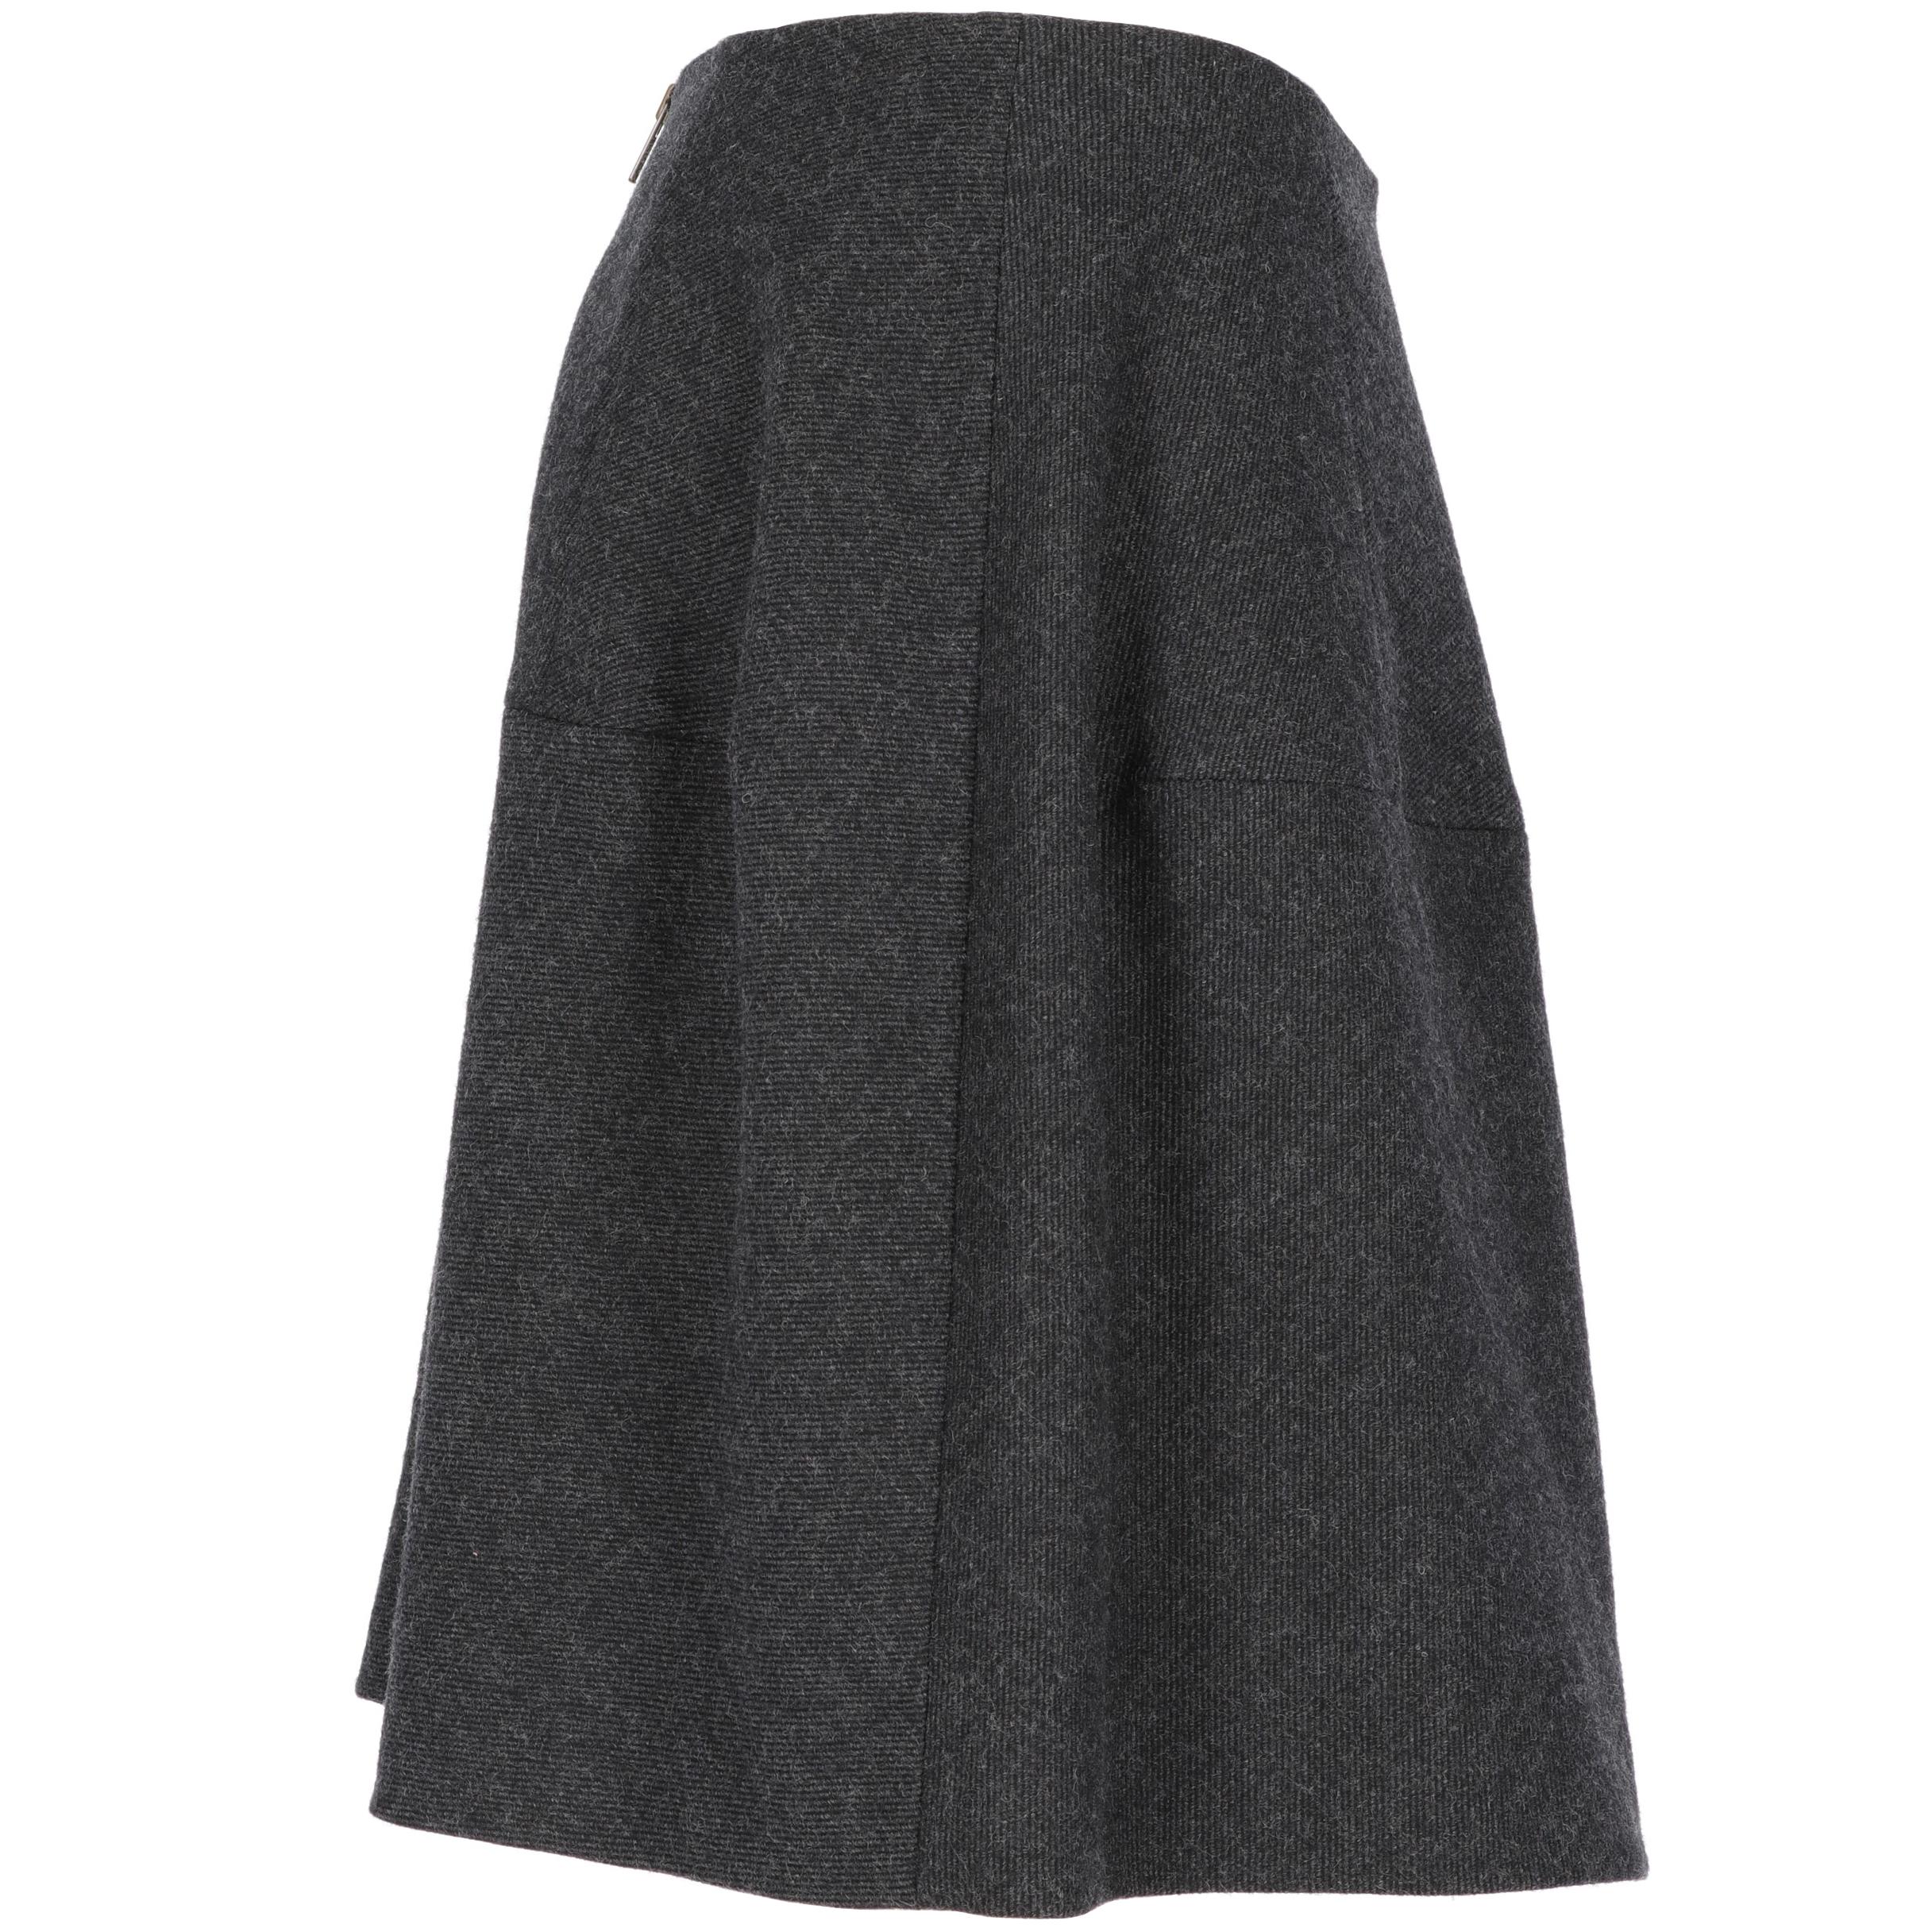 Marni asphalt grey wool mini skirt with a flared cut and zip fastening on the back.

Years: 2000s

Made in Italy

Size: 40 IT


Flat measurements
Height: 50 cm
Waist: 38 cm

Composition
97% Wool
3% Nylon